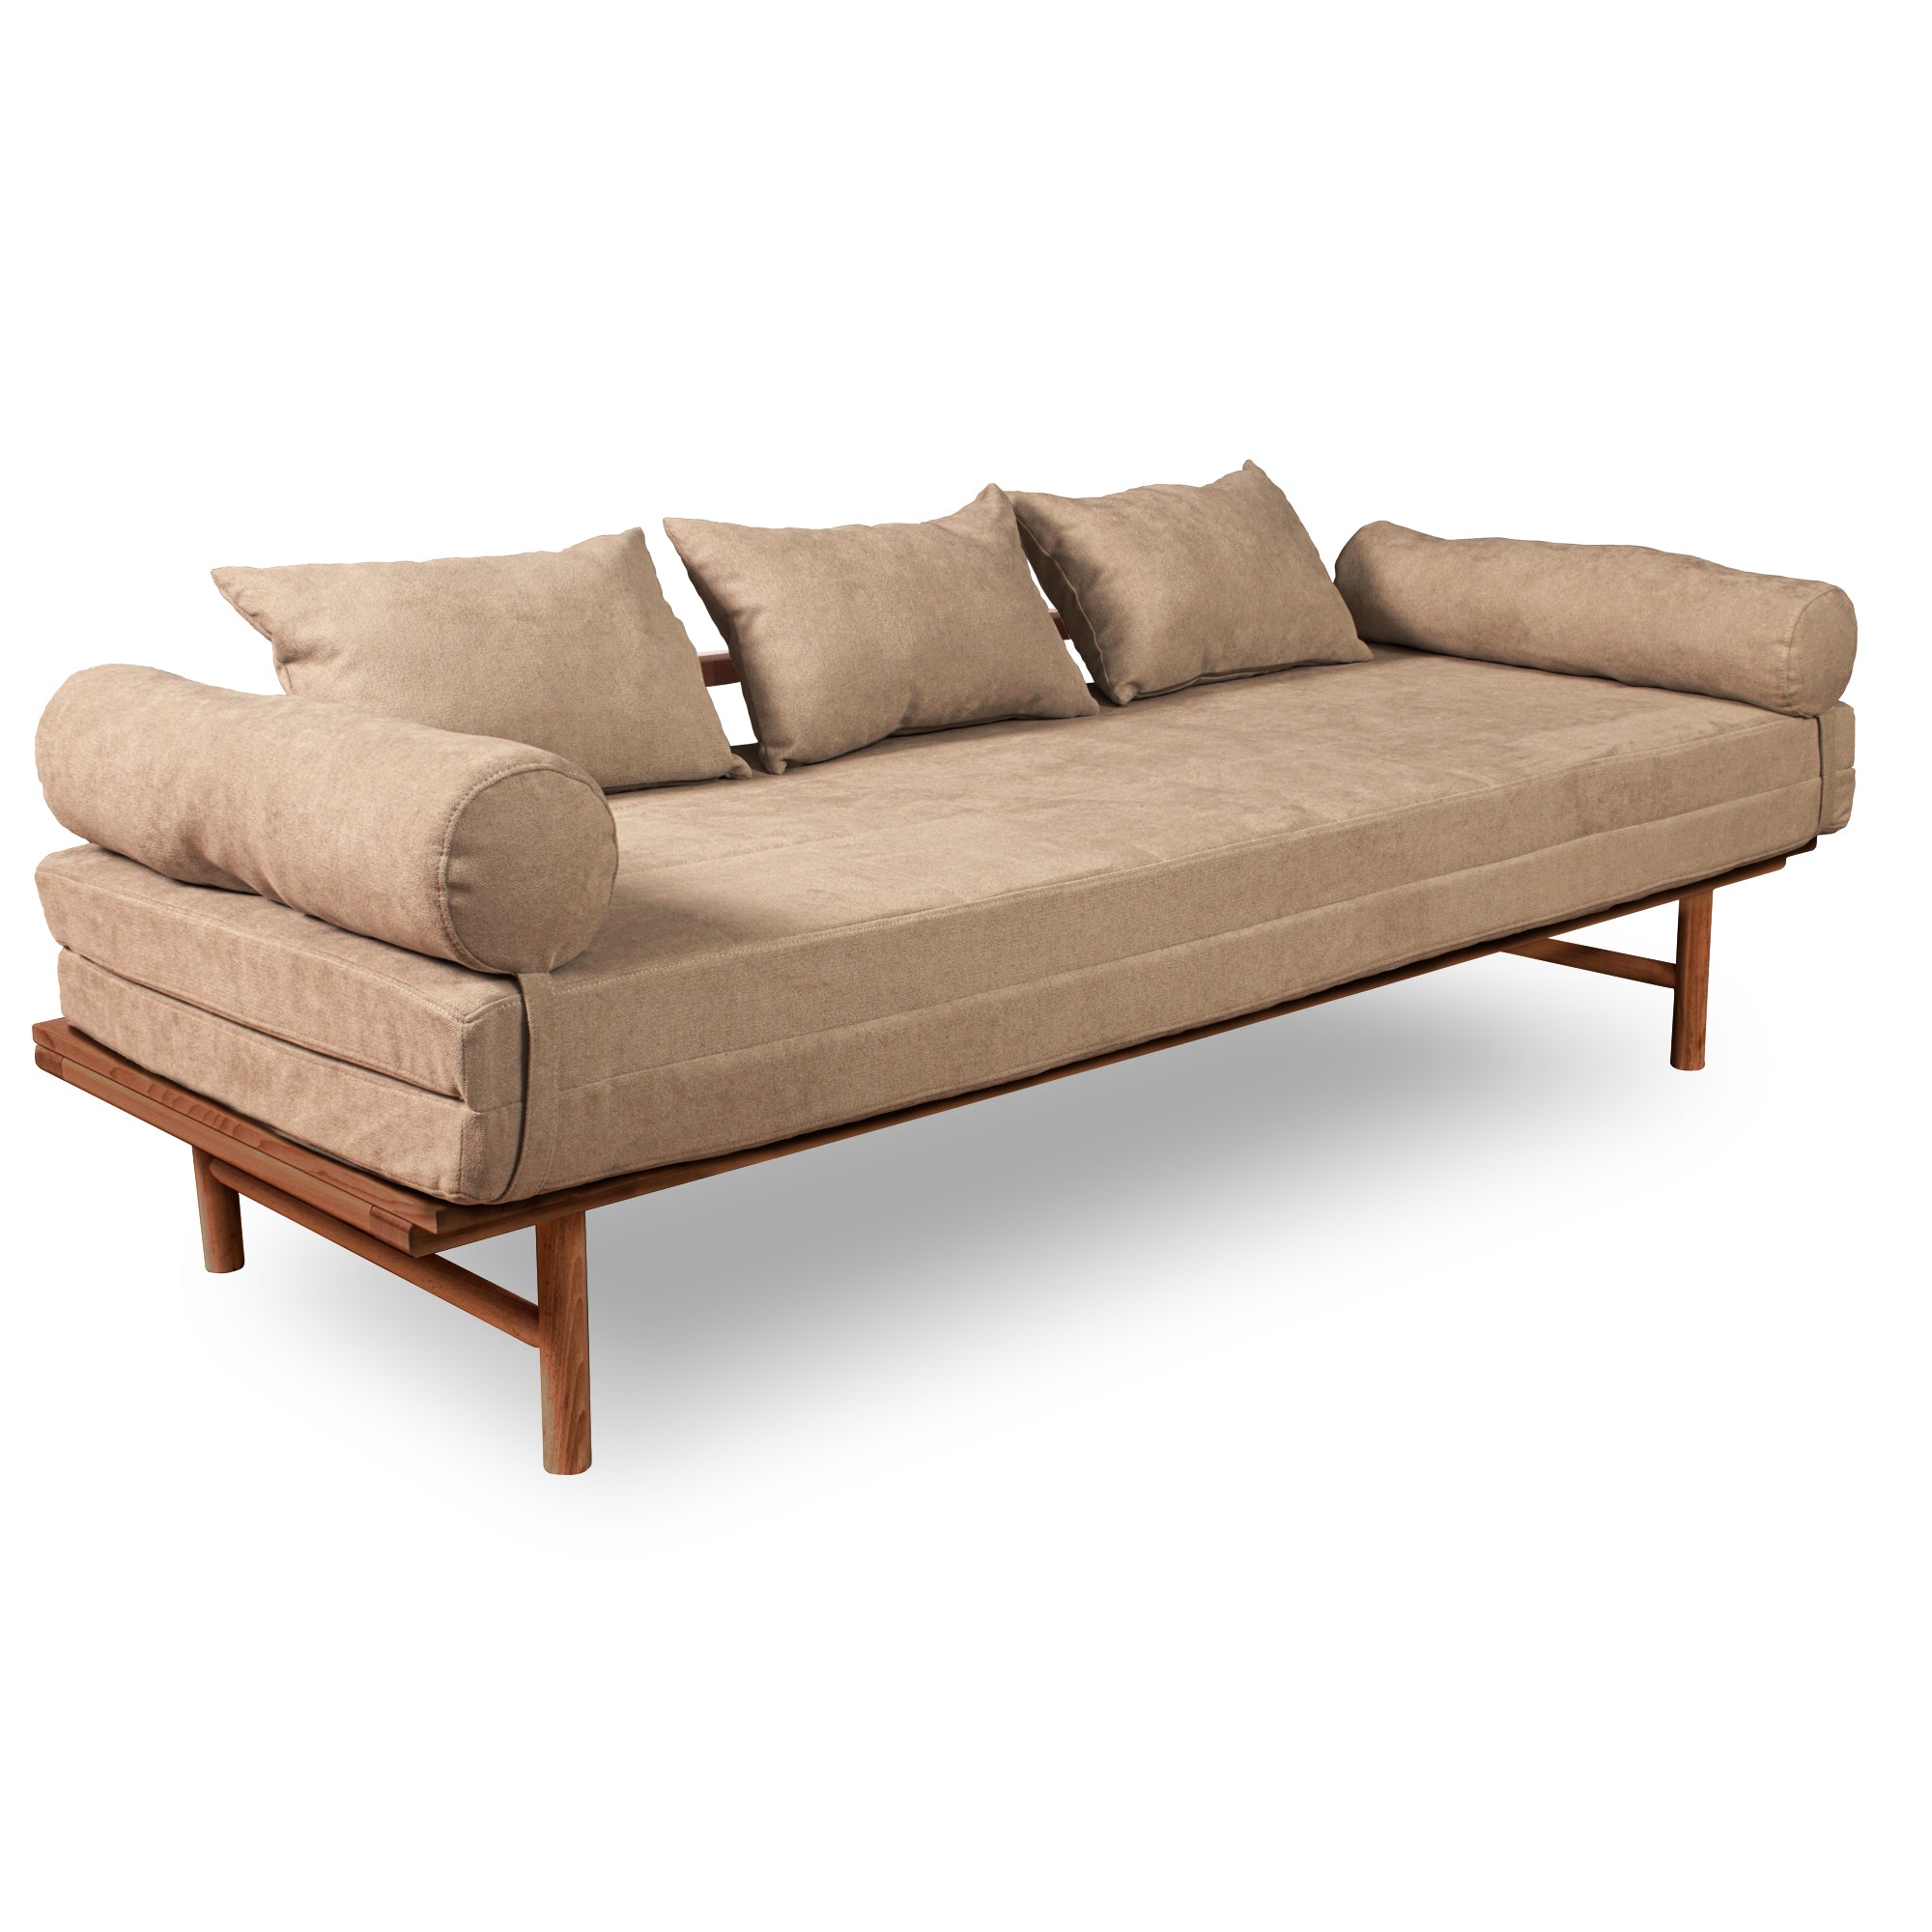 Le MAR Folding Daybed, Beech Wood Frame, Caramel Colour-beige upholstery